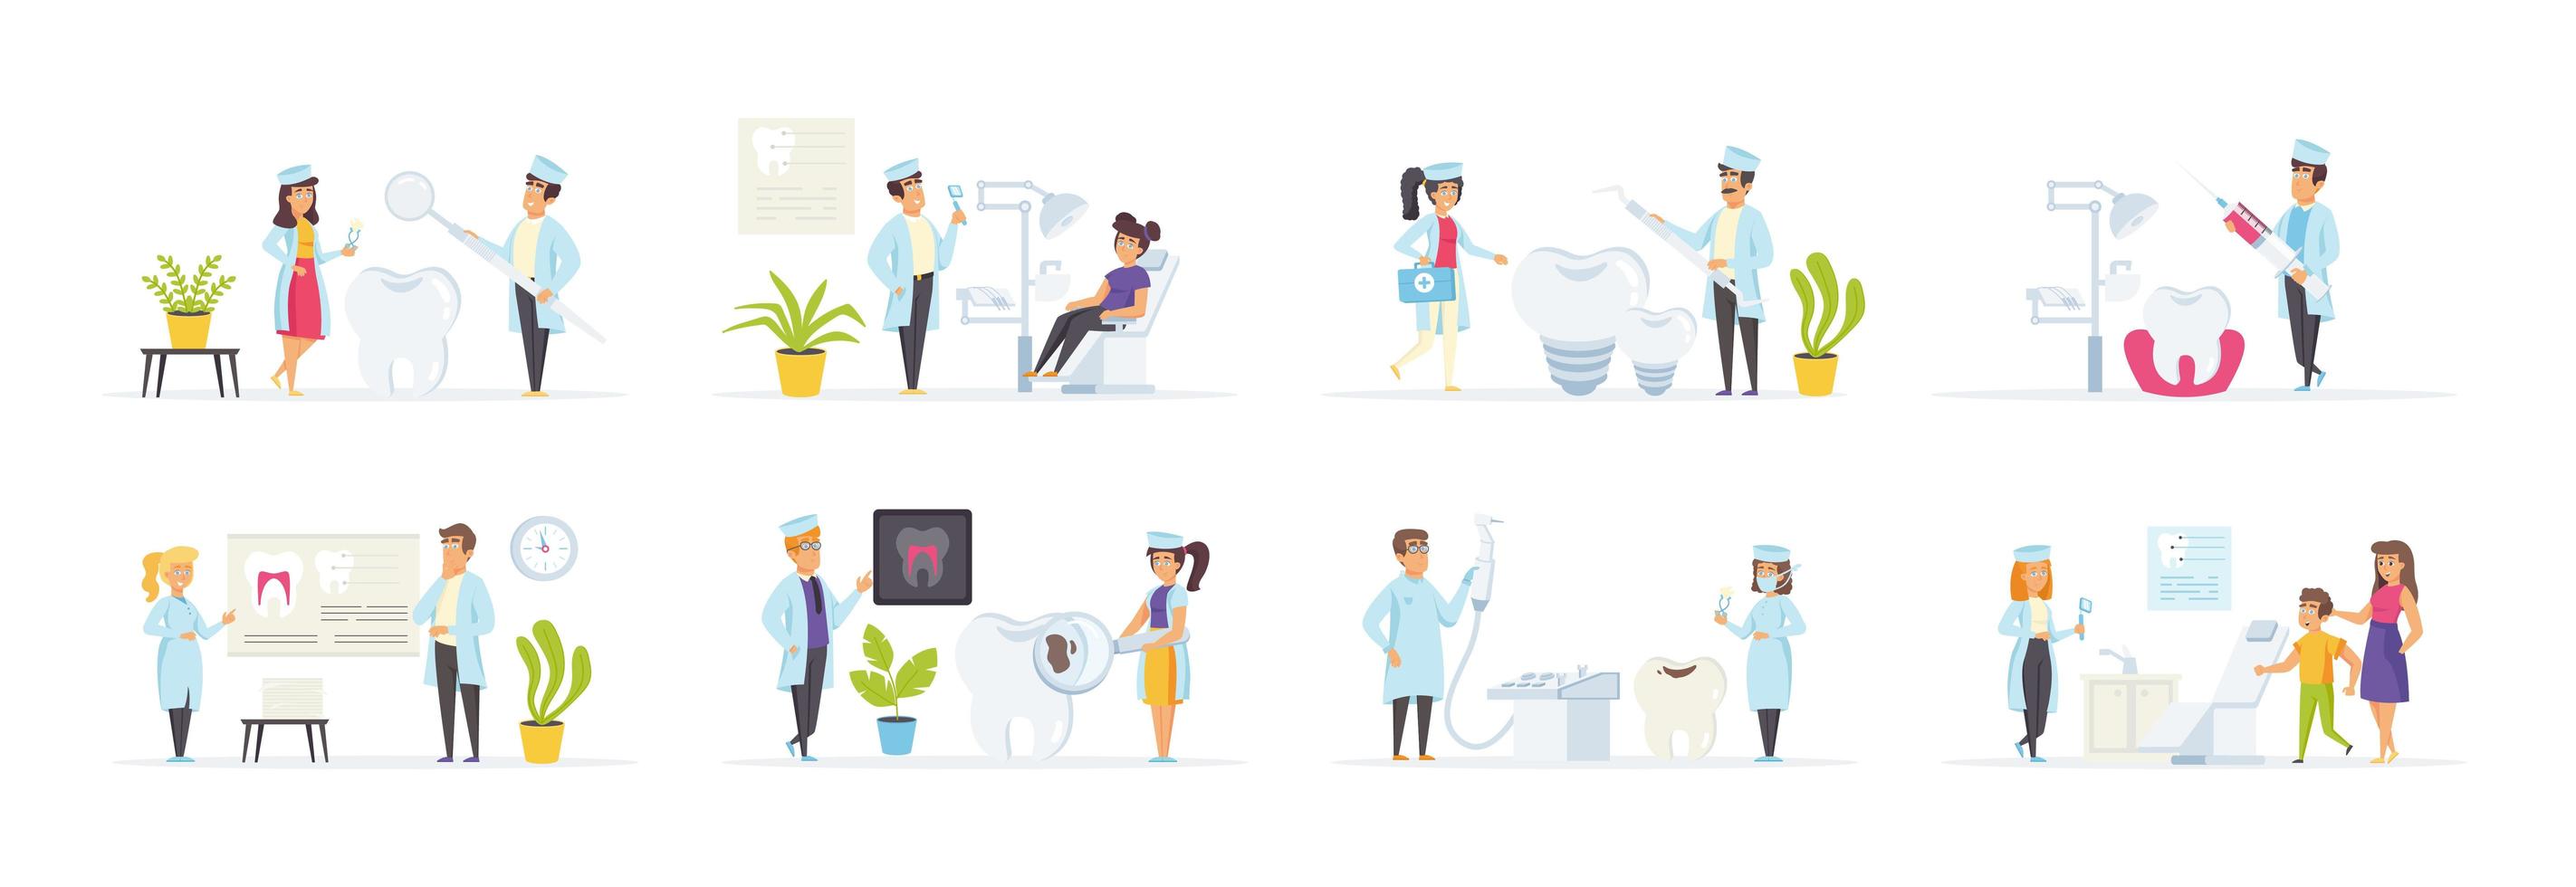 Dental clinic set with characters in various scenes vector